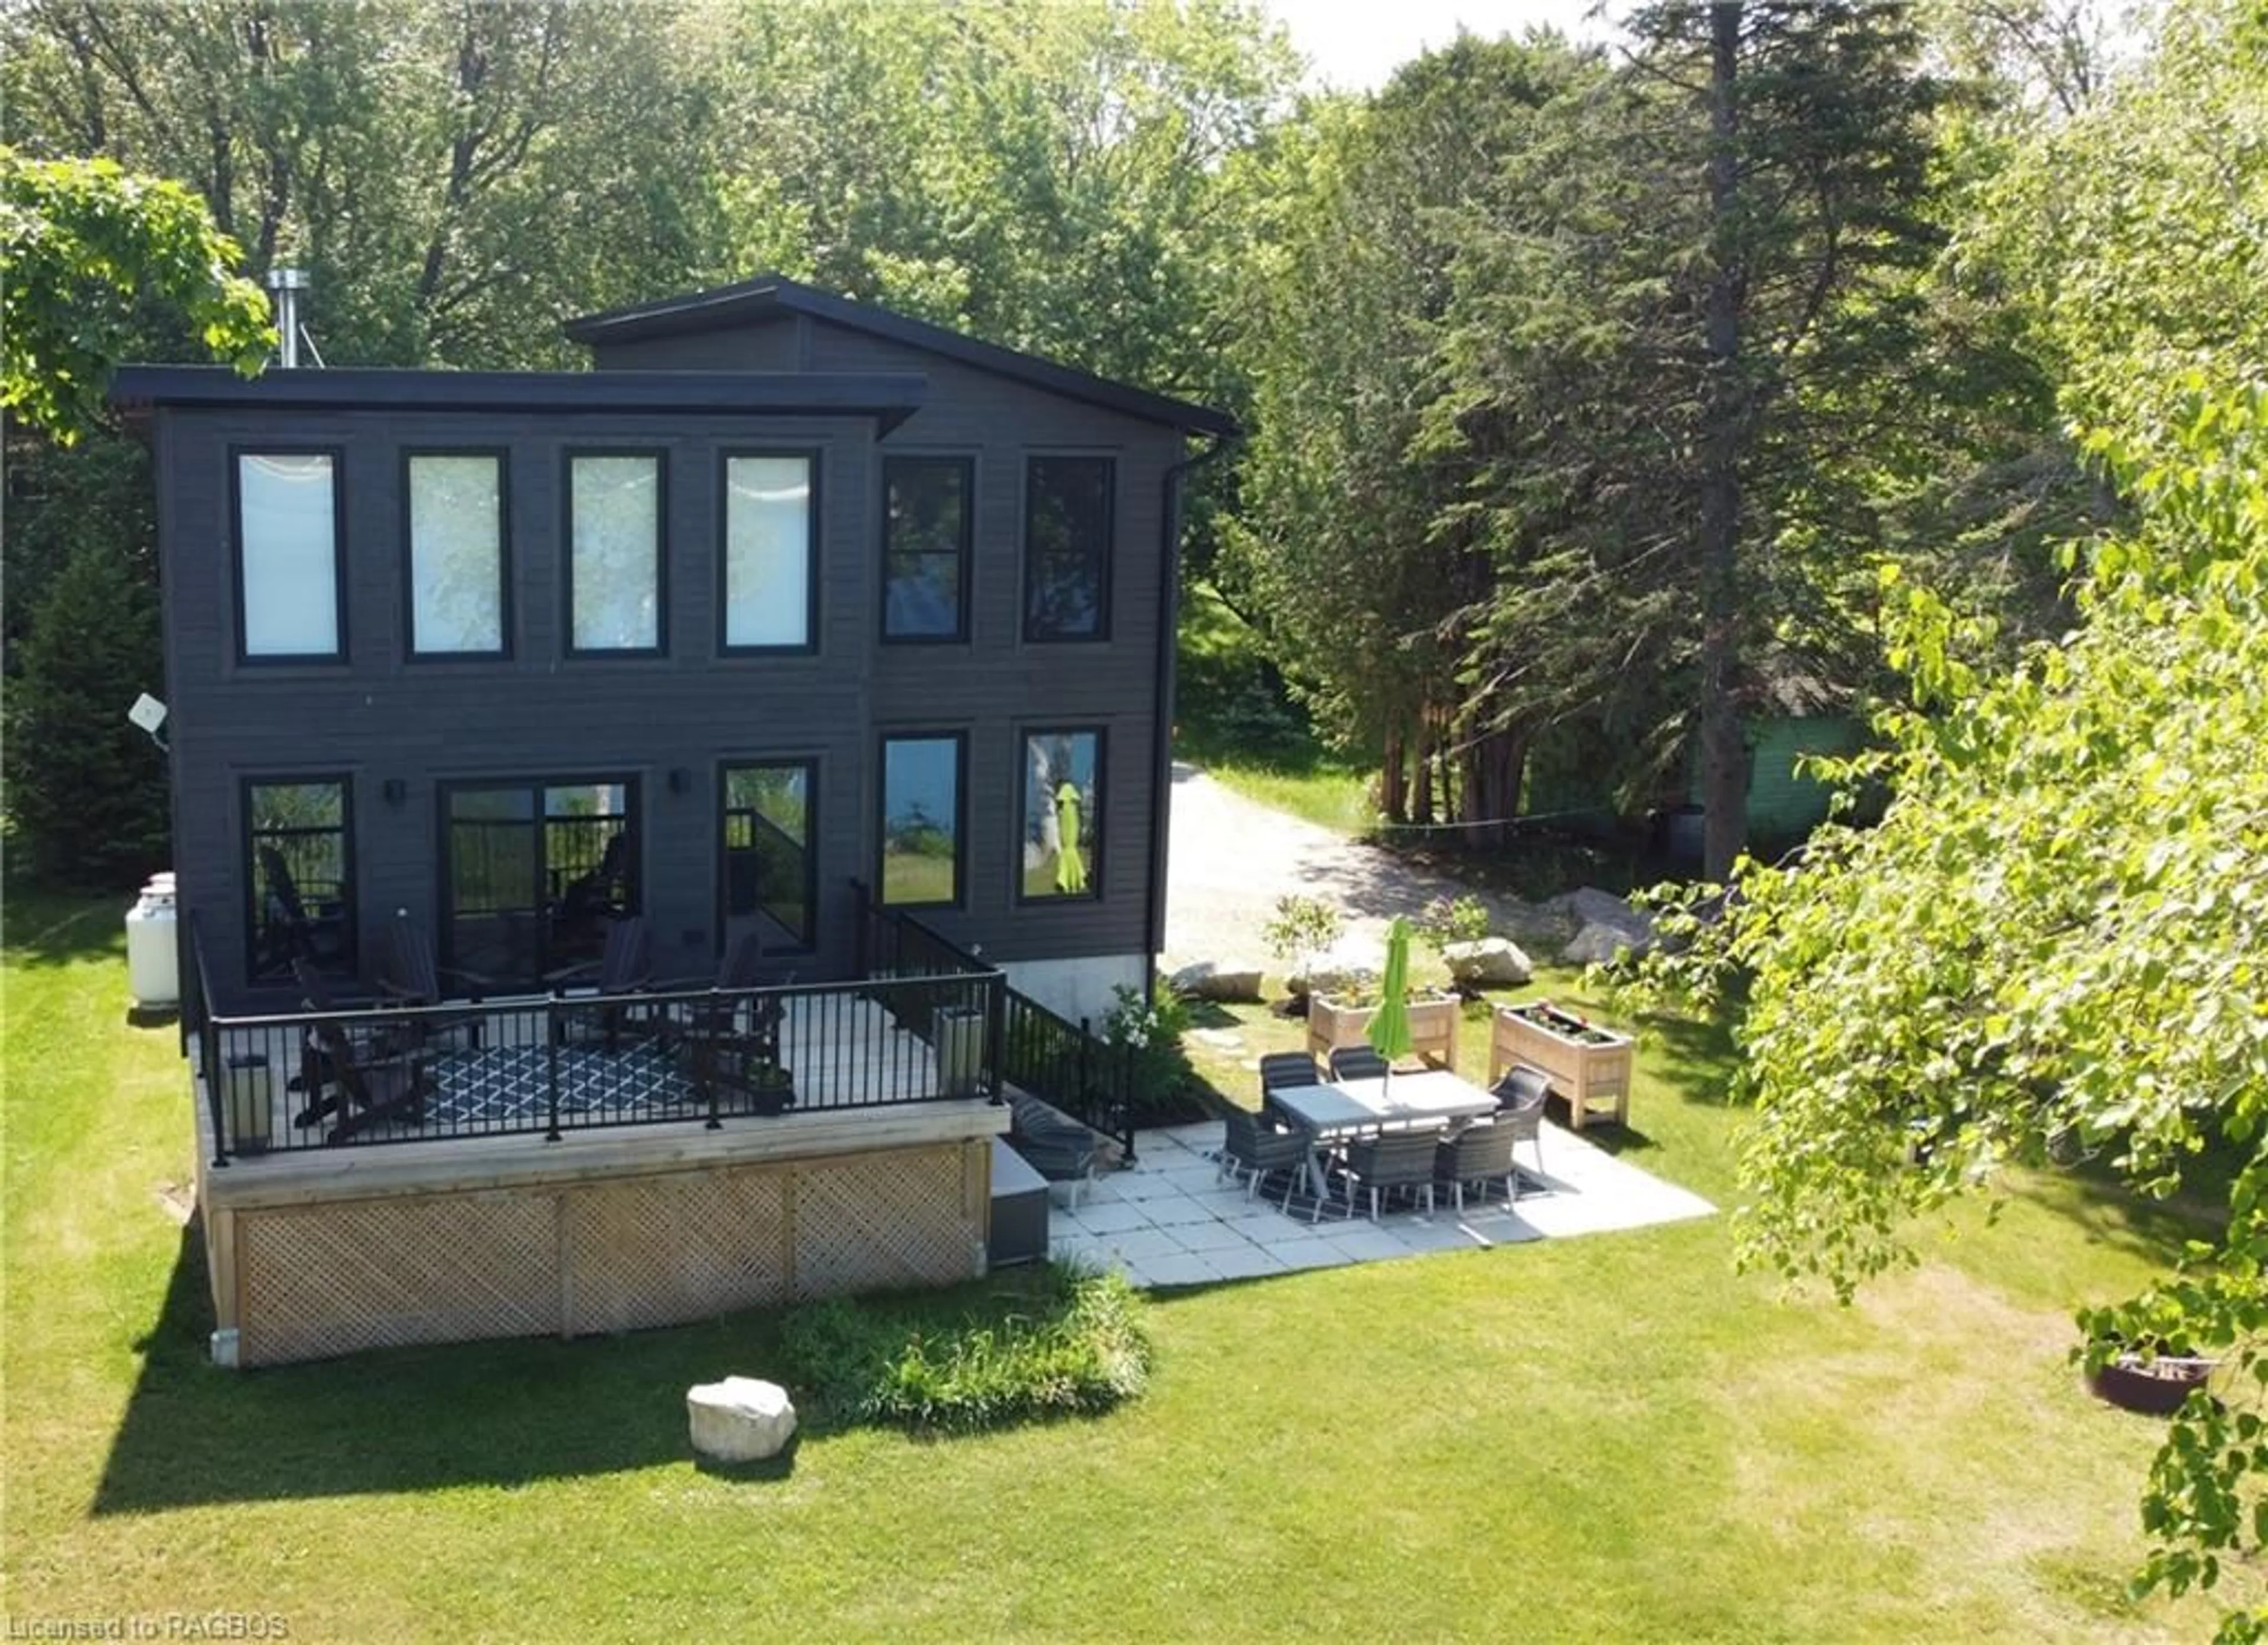 Outside view for 150 Moore St, Lion's Head Ontario N0H 1W0